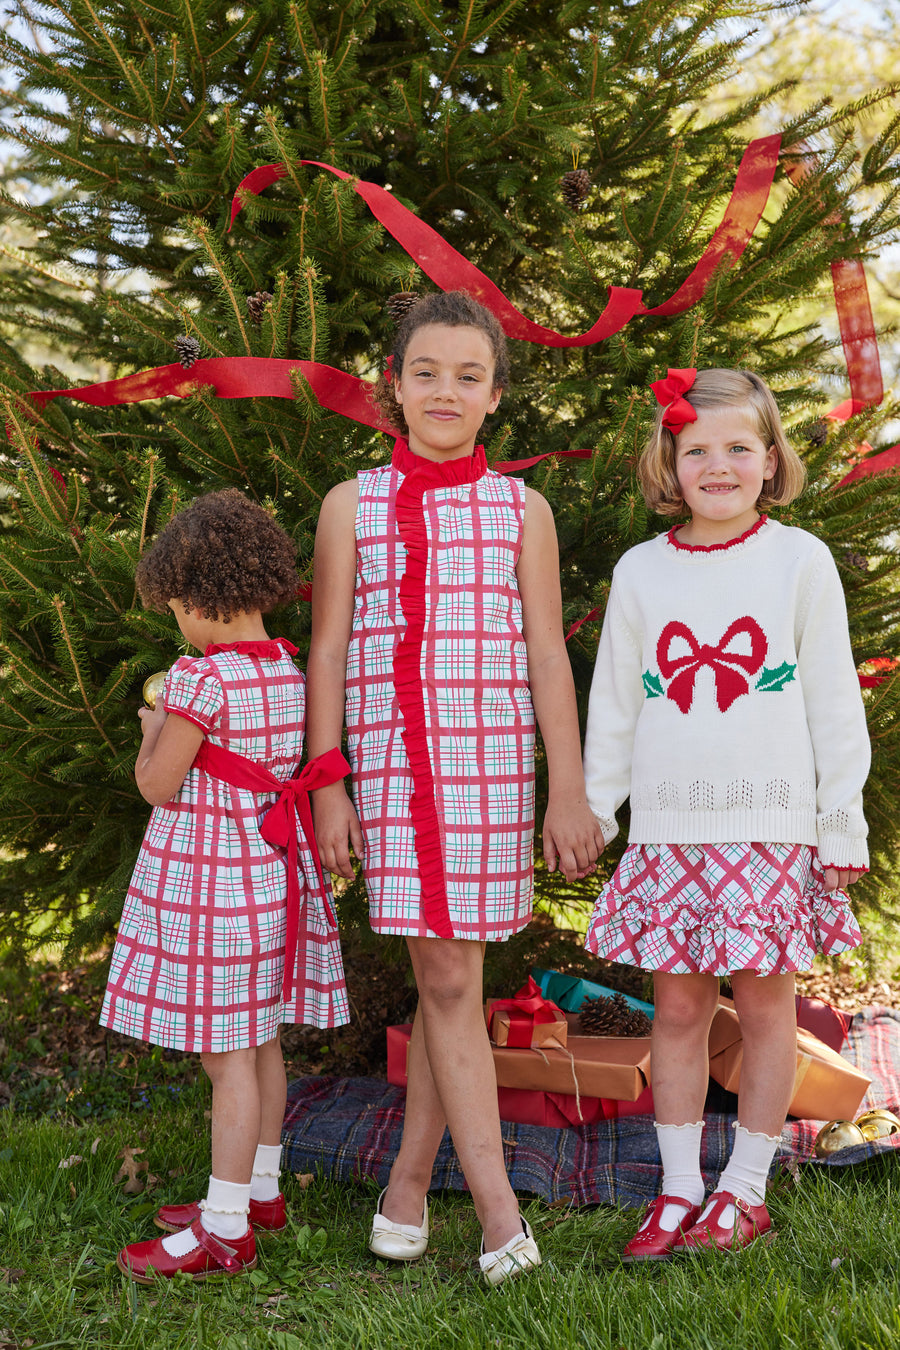 Little English classic tween girl dress in holiday plaid pattern with red ruffle running around neck and down front